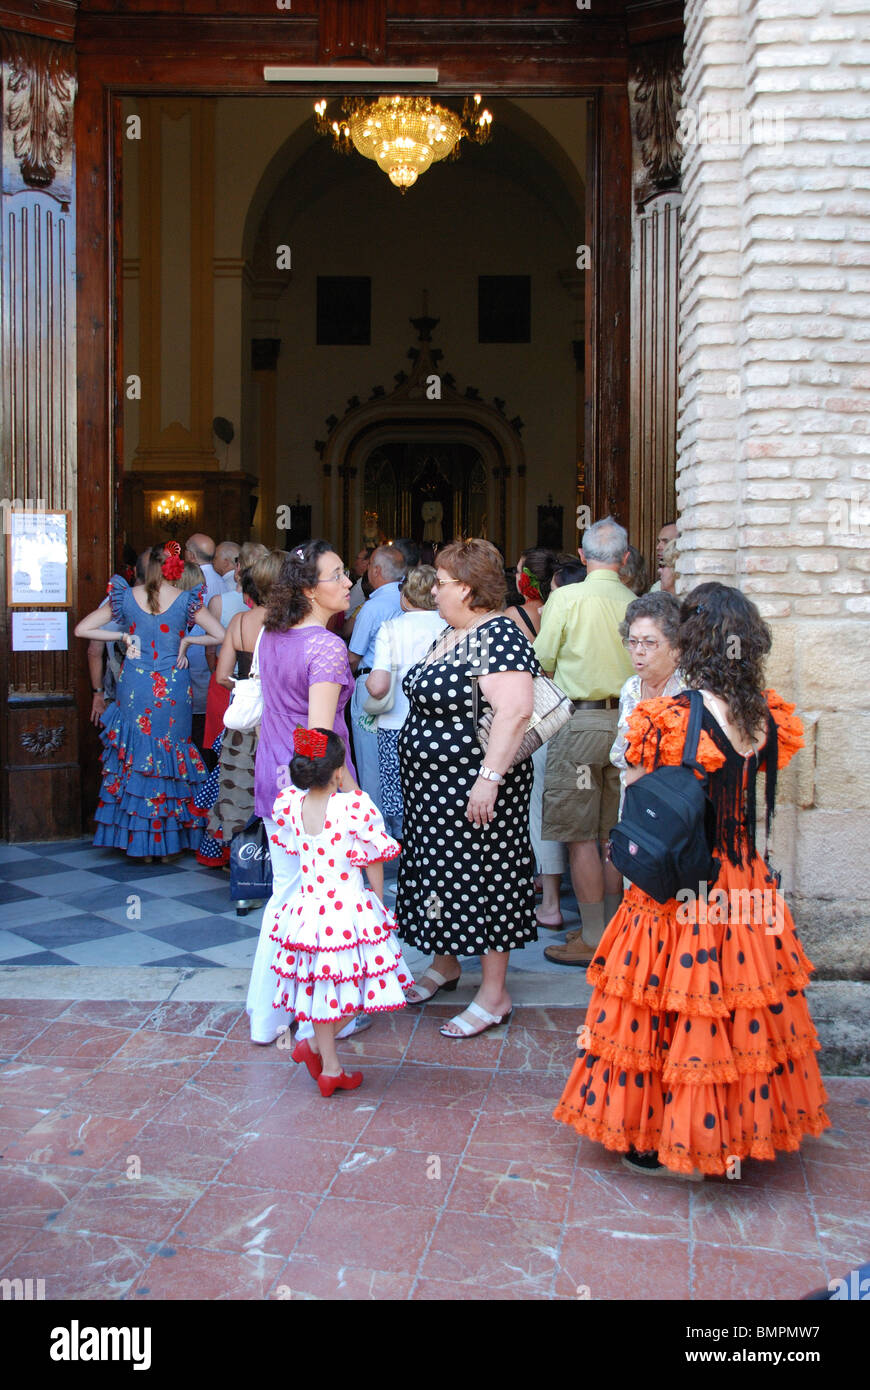 Women in traditional dress entering the church, Marbella, Costa del Sol, Malaga Province, Andalucia, Spain, Western Europe. Stock Photo